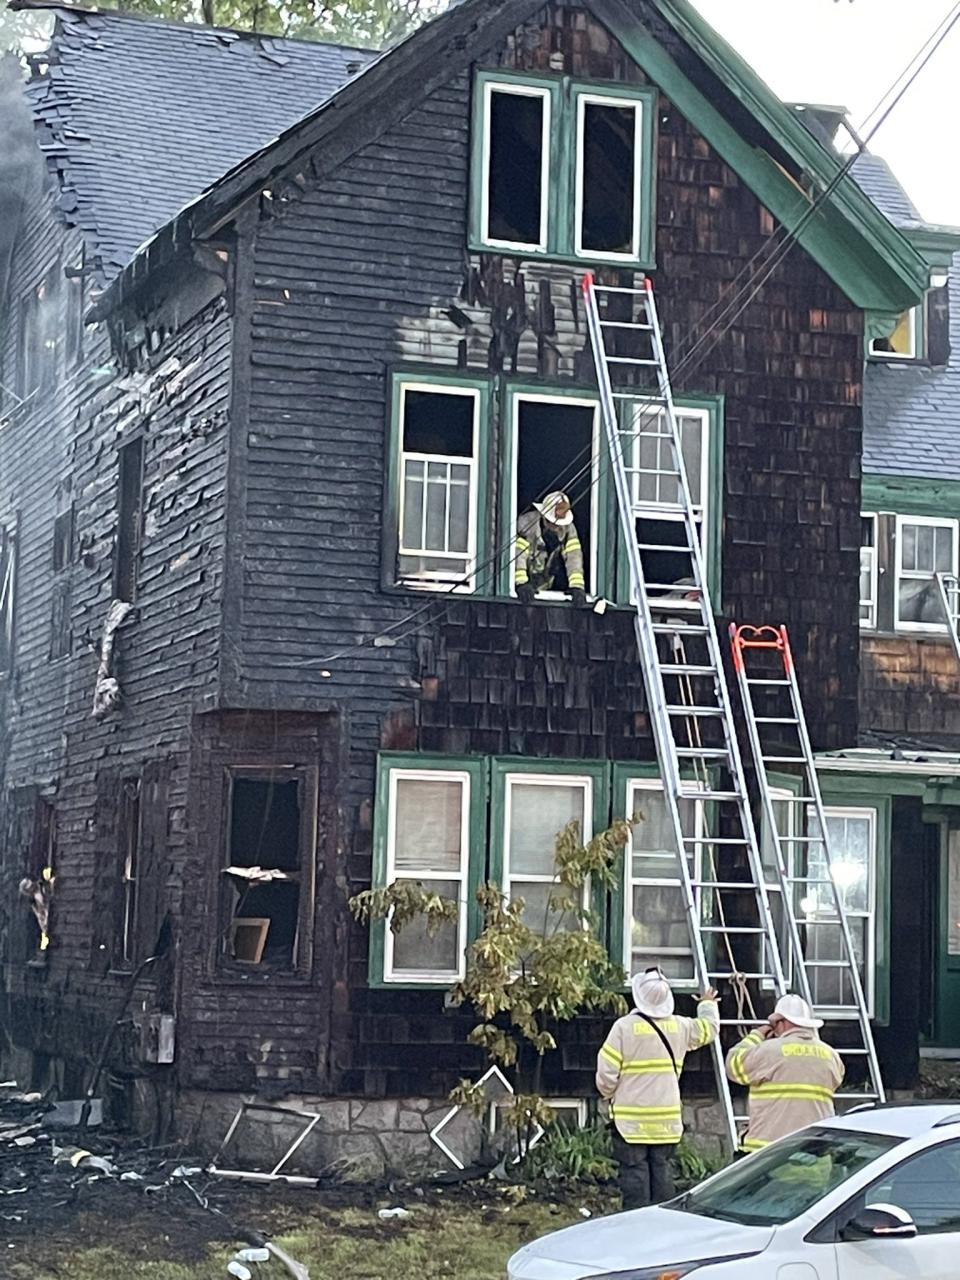 Fire seriously damages two homes in Brockton